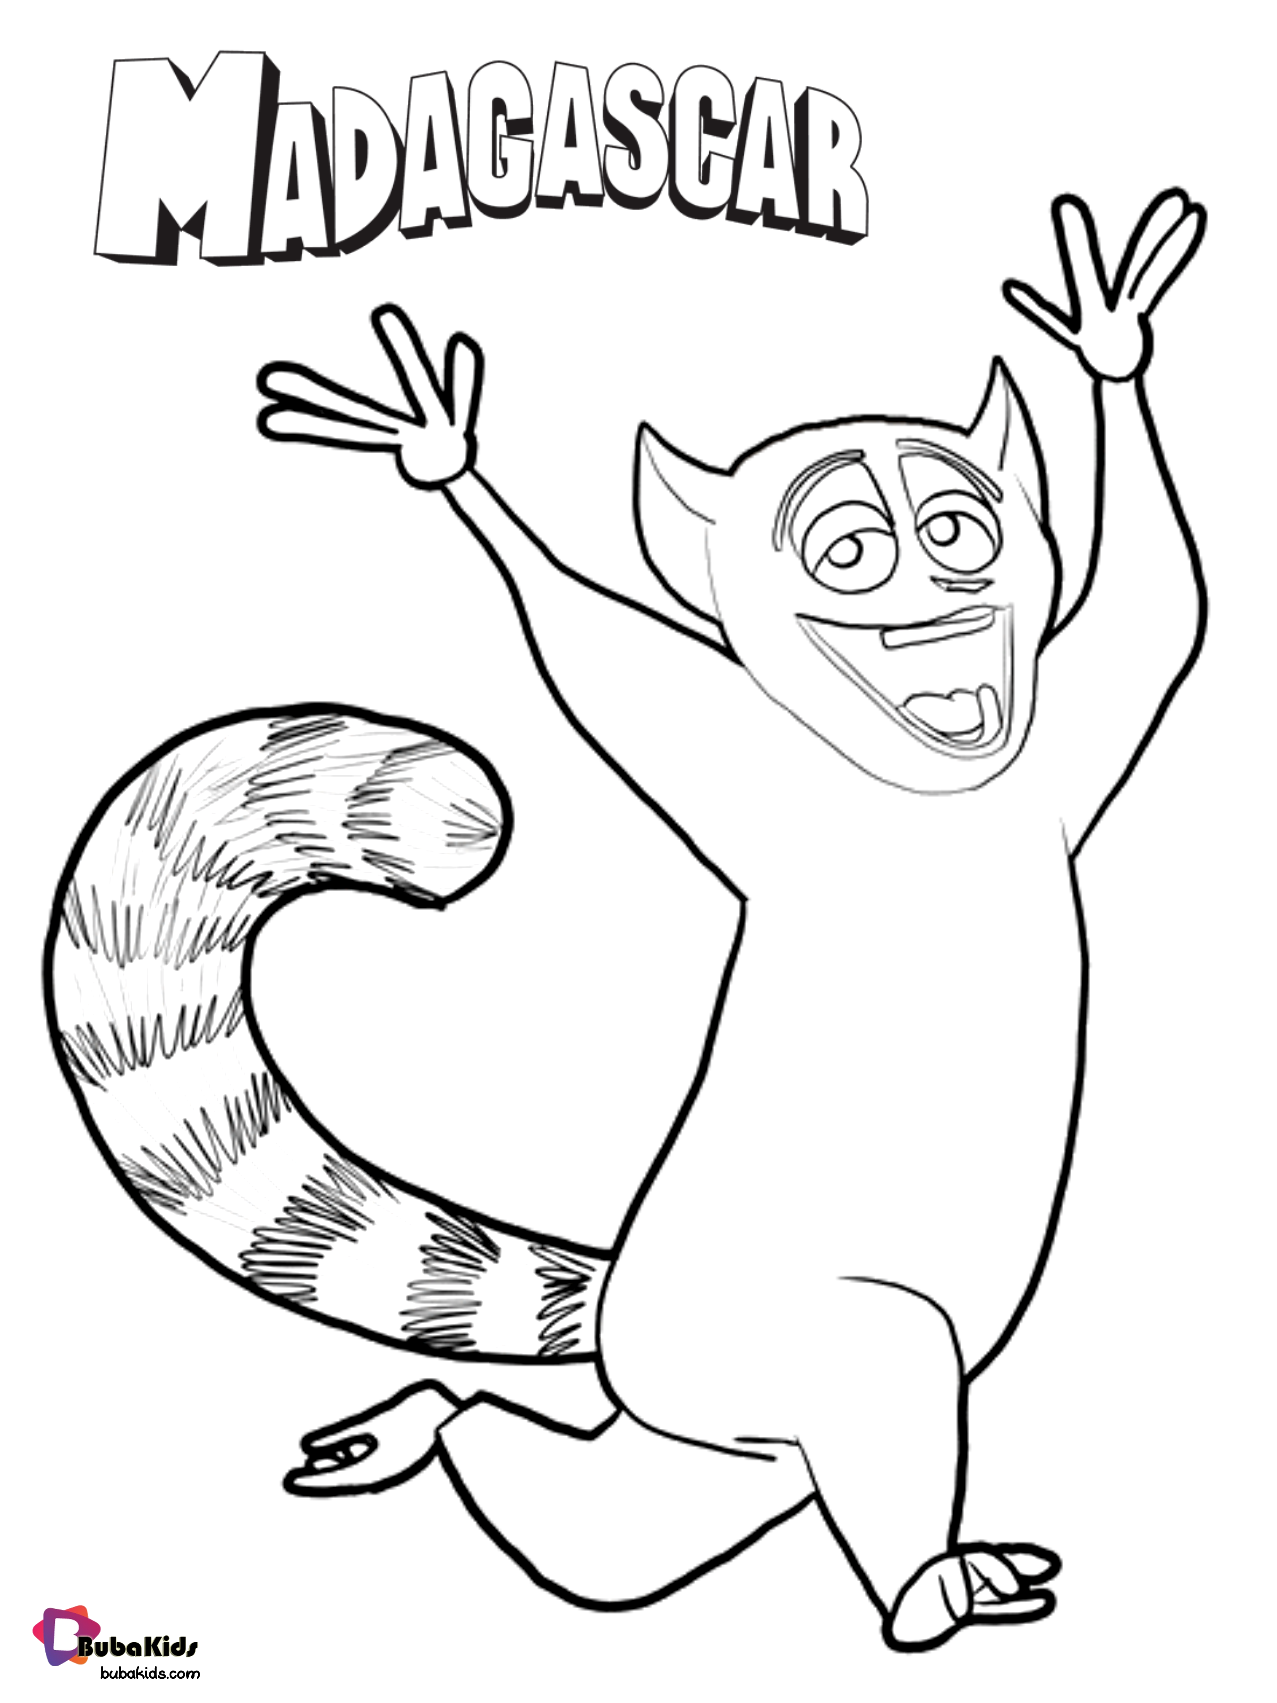 Madagascar movie character julien coloring page Wallpaper